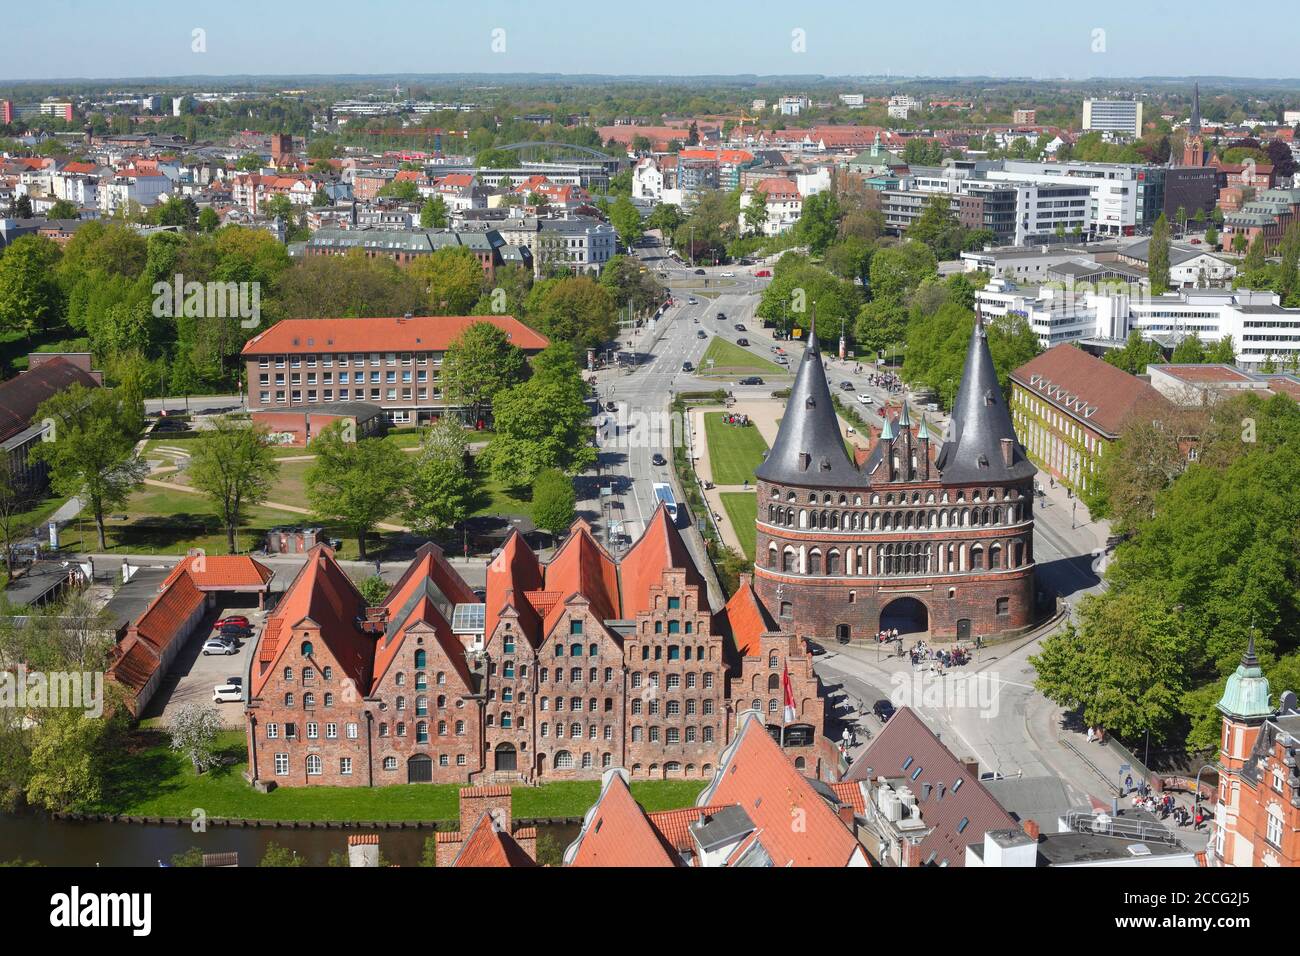 View of historic salt storage and the Holsten Gate from the Petrikirche, Lübeck, Schleswig-Holstein, Germany, Europe Stock Photo